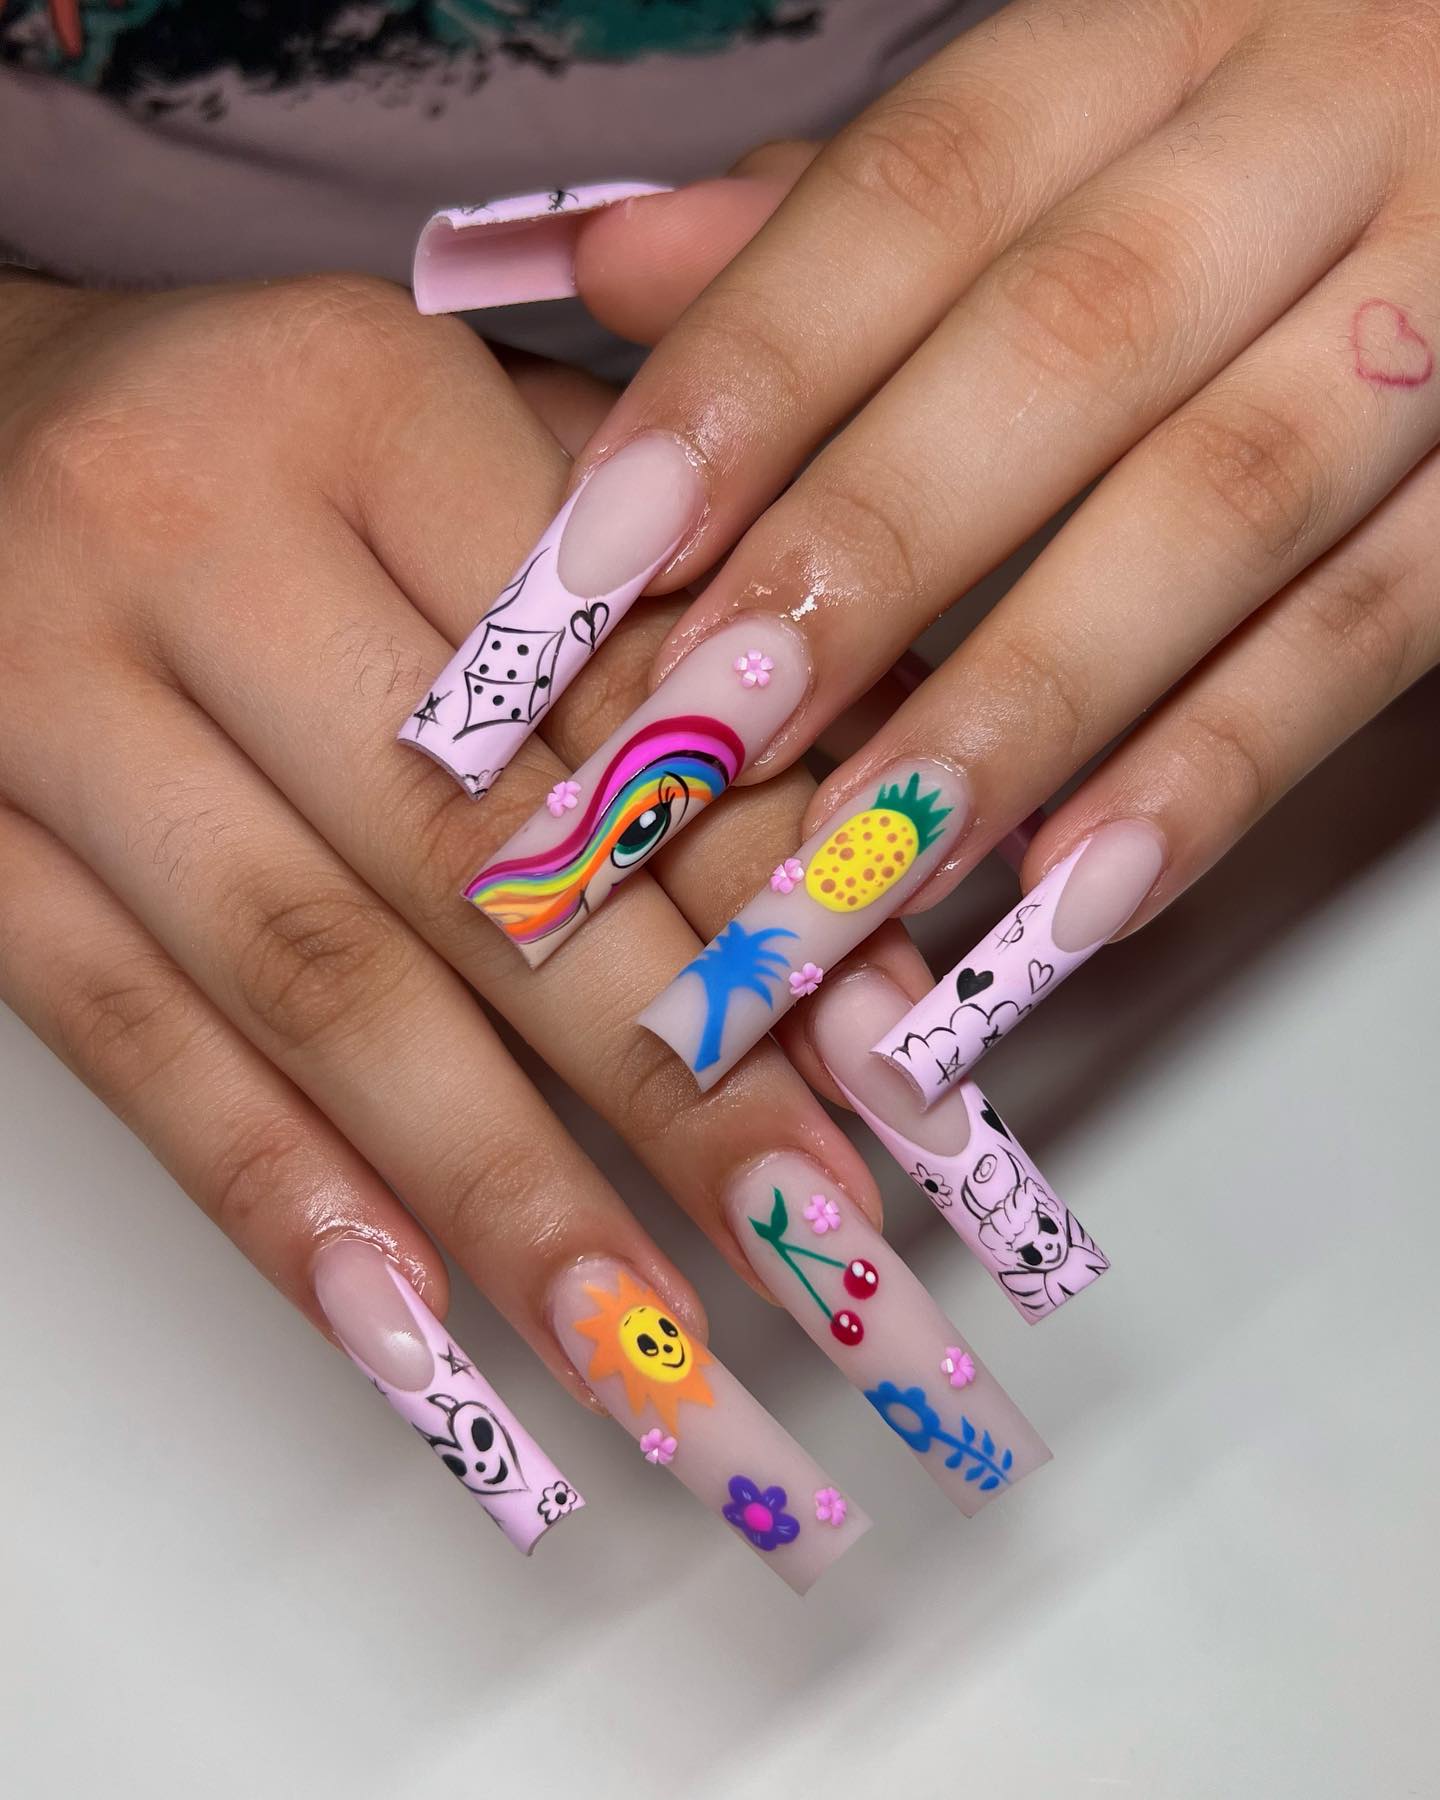 Purple Whimsical Nails With Hand-Drawn Art
